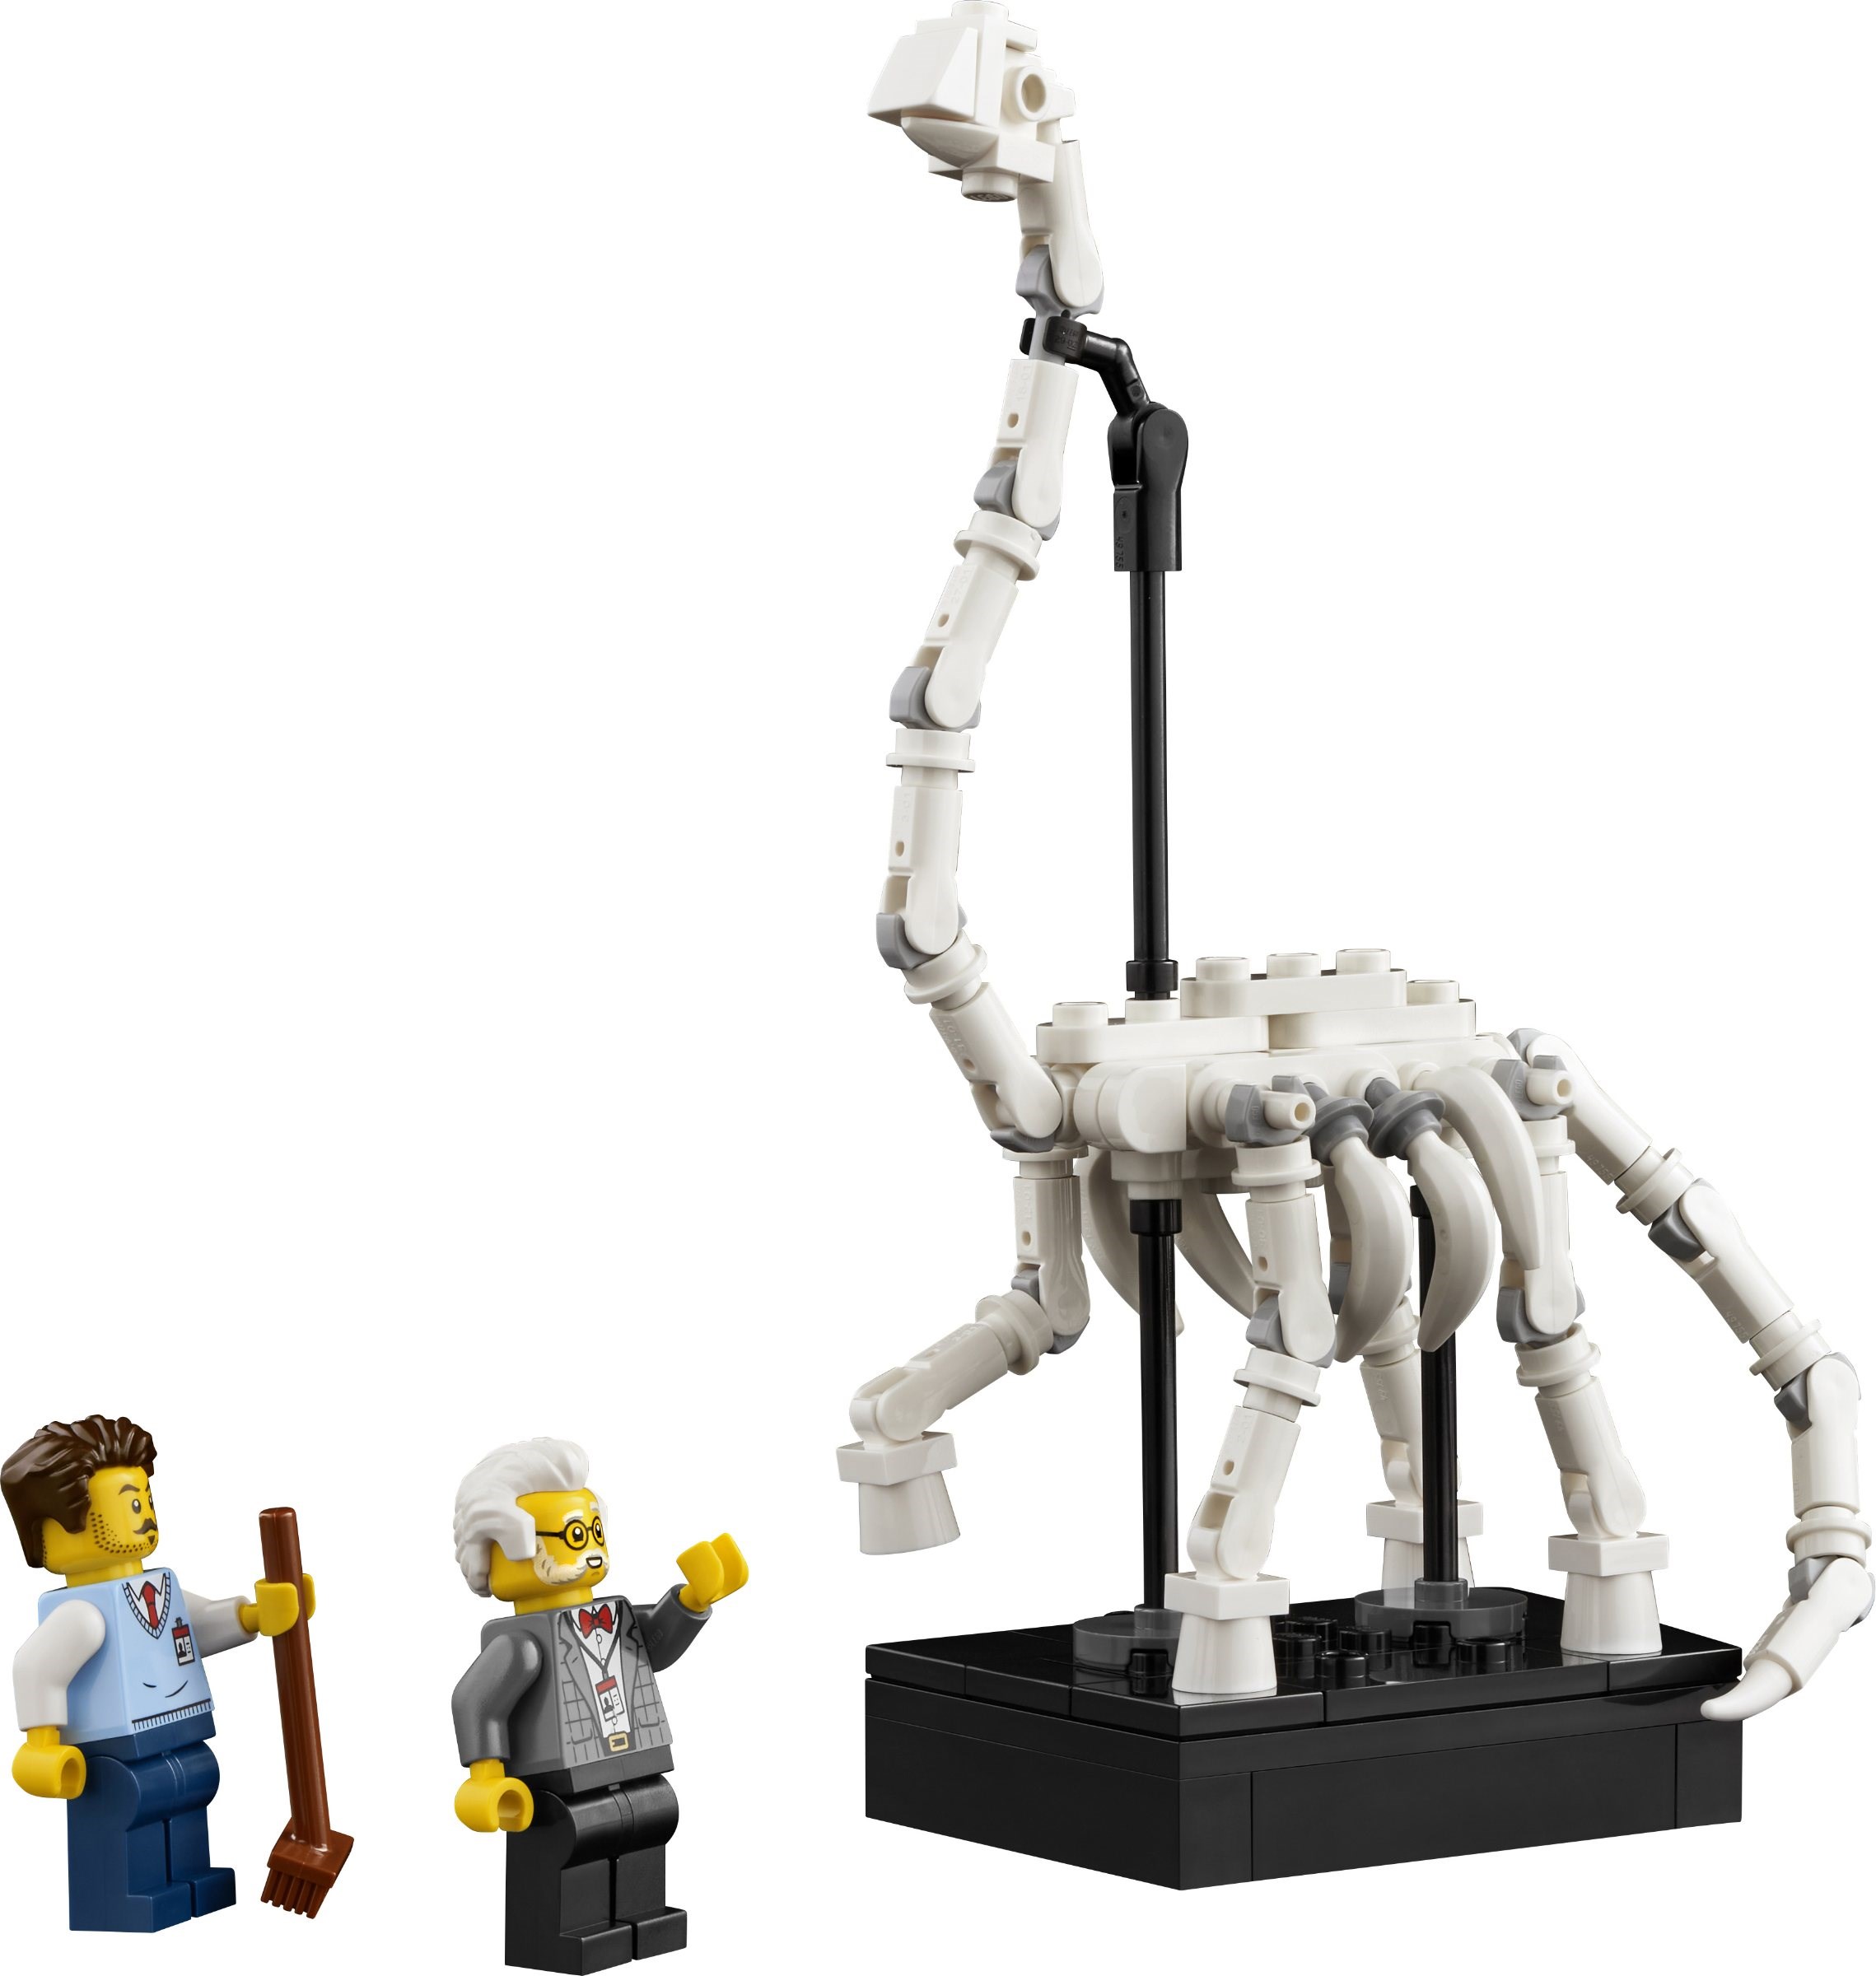 Lego unveils new Natural History Museum set with 4,000-piece count